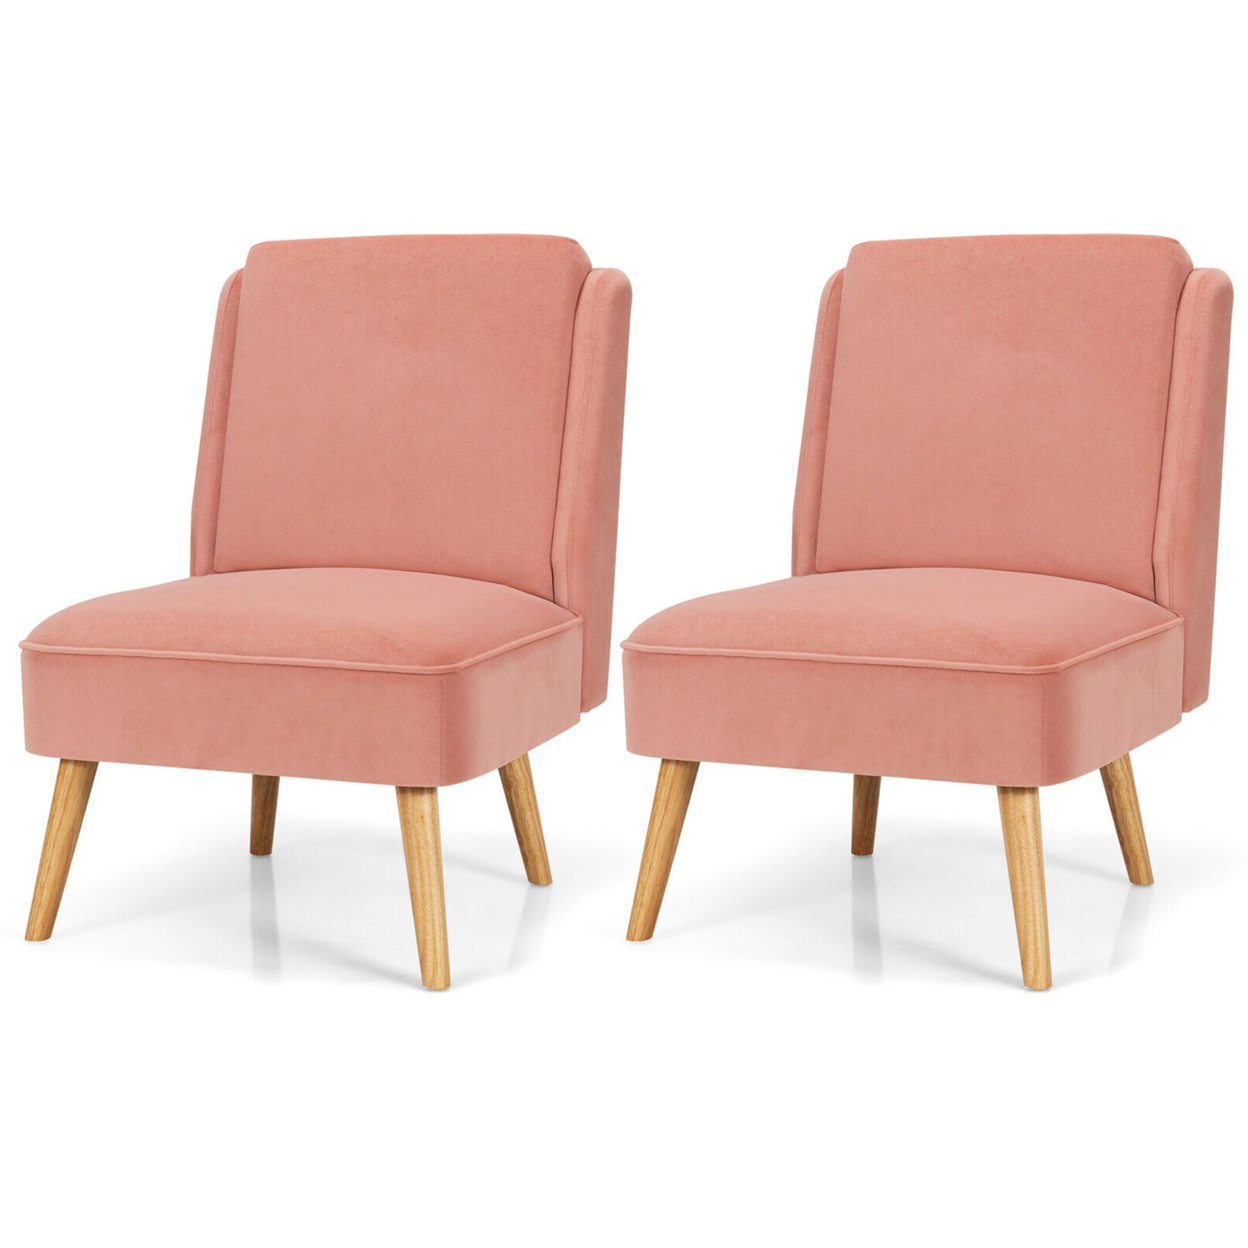 2PCS Velvet Accent Chair Single Sofa Chair Leisure Chair With Wood Frame Pink